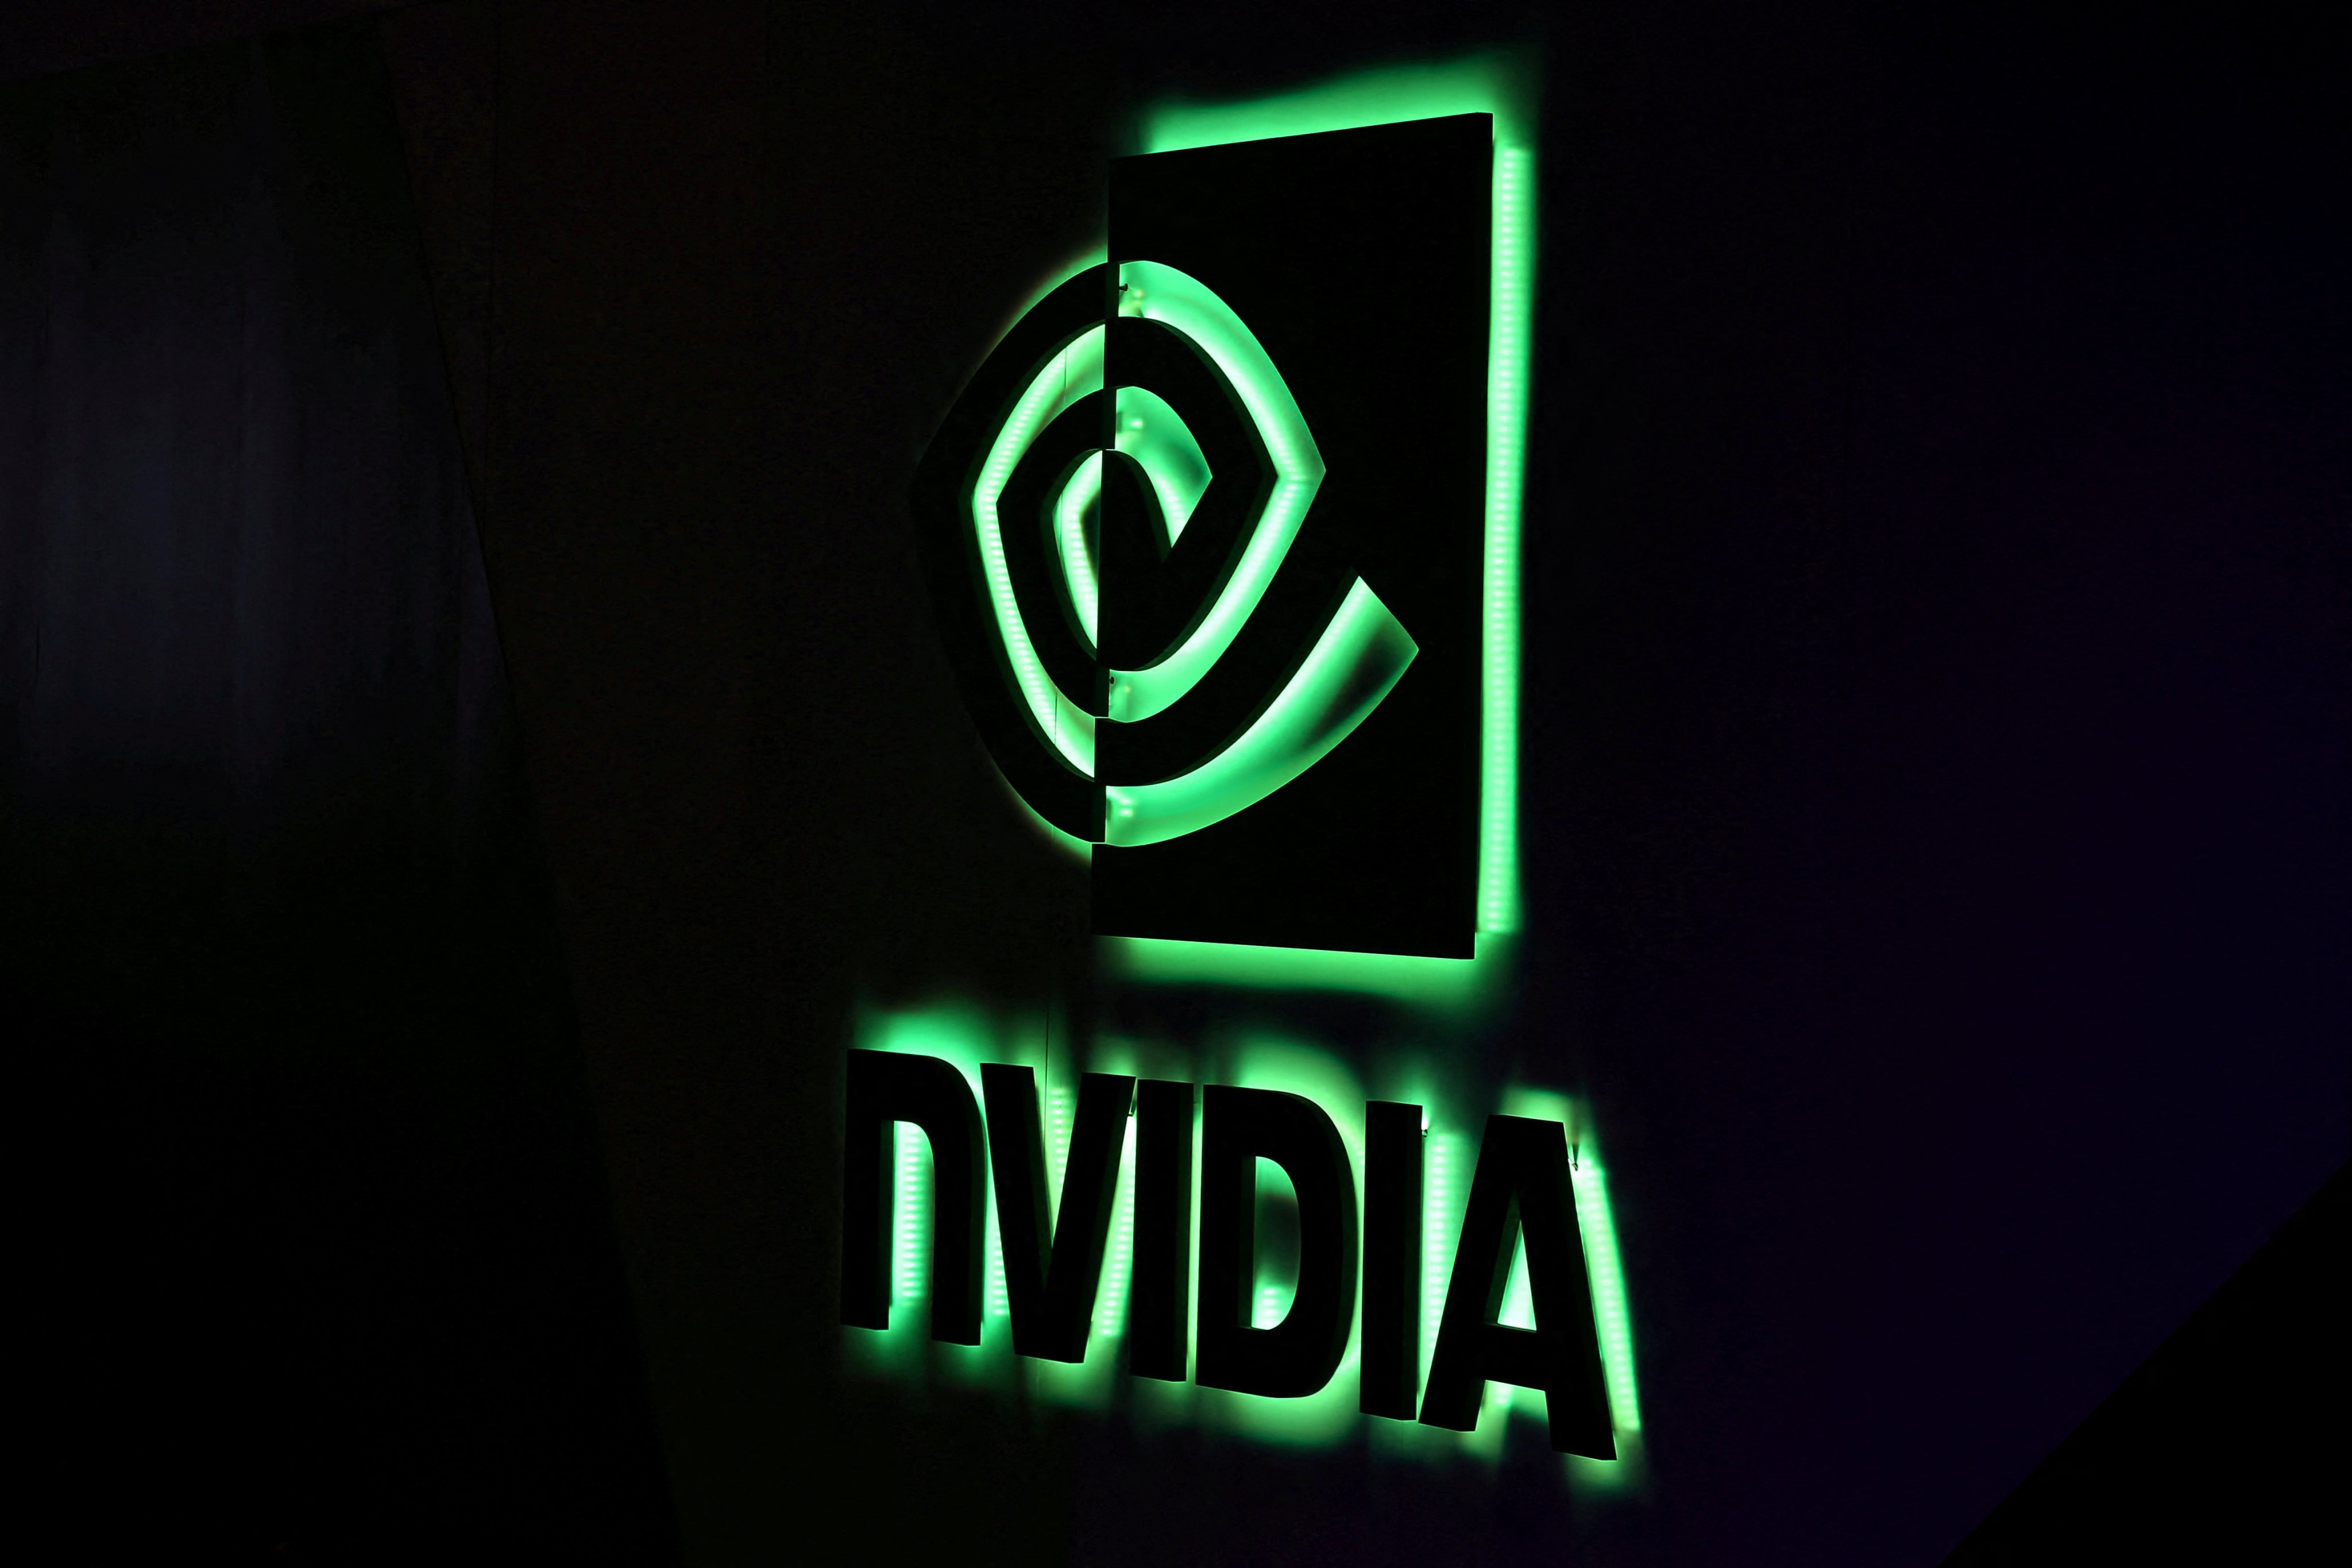 Nvidia Corp's logo is shown at SIGGRAPH 2017 in Los Angeles, California, on July 31, 2017.  Photo: Reuters